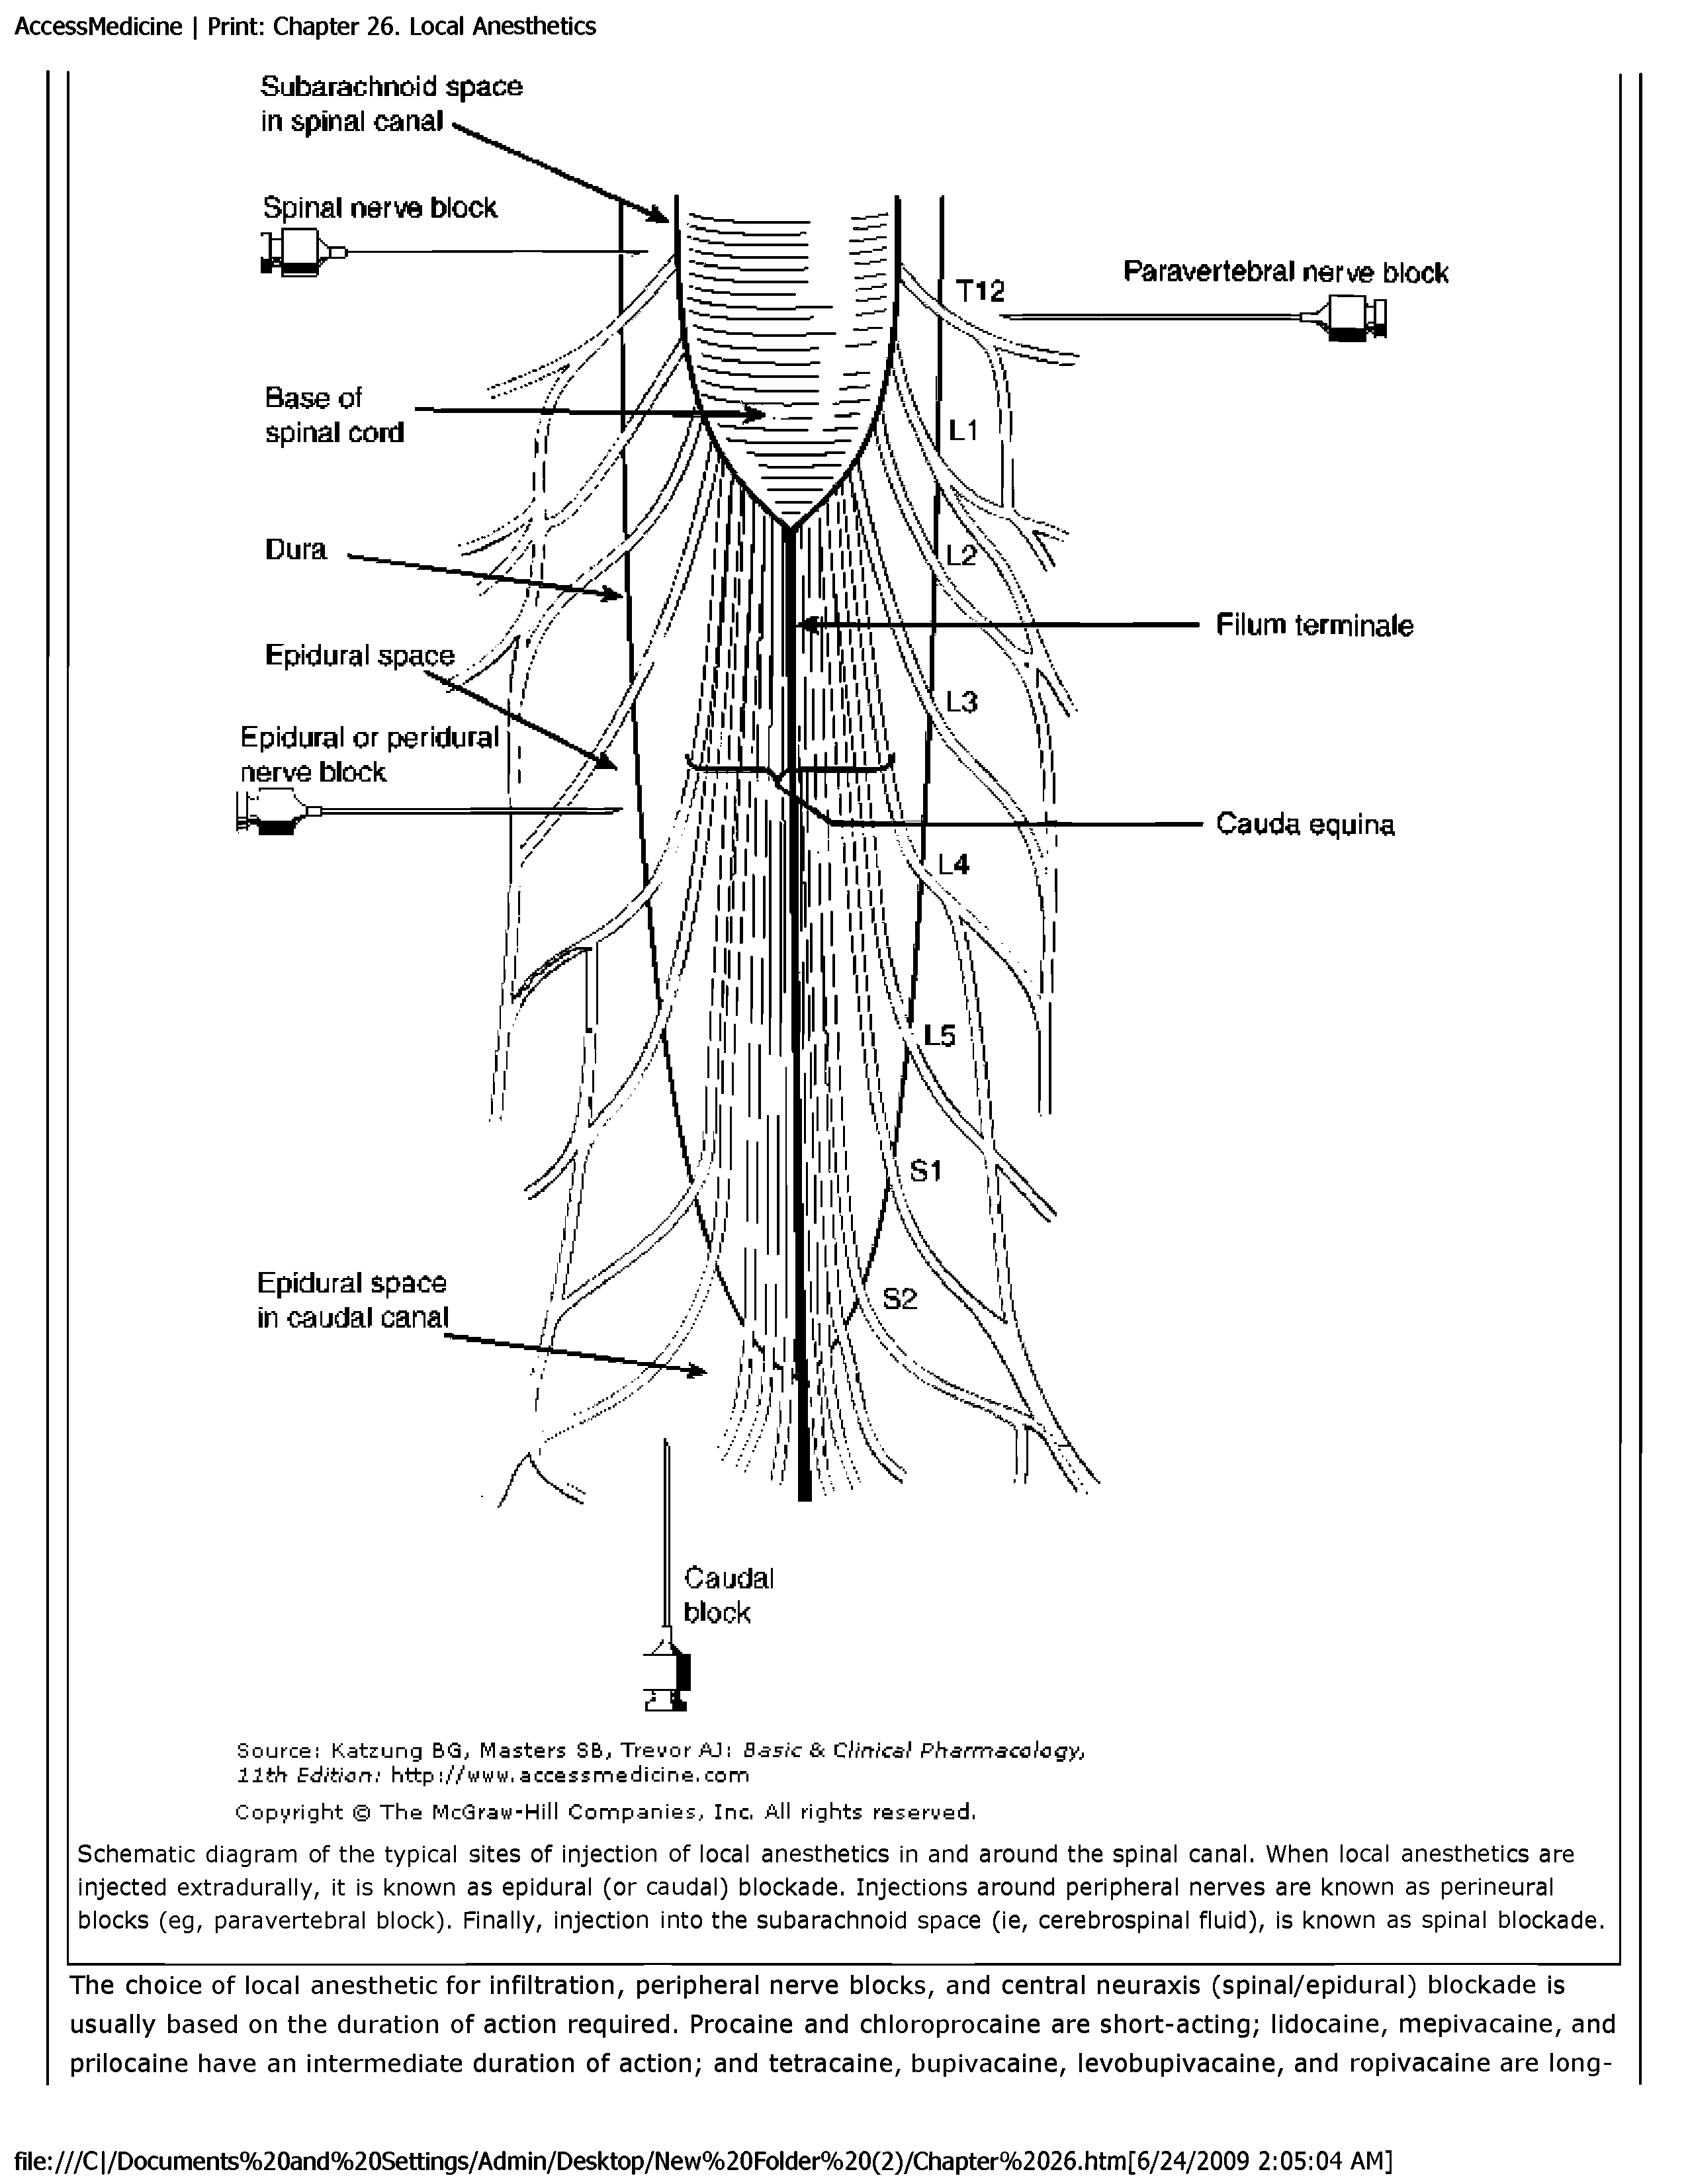 Schematic diagram of the typical sites of injection of local anesthetics in and around the spinal canal. When local anesthetics are injected extradurally, it is known as epidural (or caudal) blockade. Injections around peripheral nerves are known as perineural blocks (eg, paravertebral block). Finally, injection into the subarachnoid space (ie, cerebrospinal fluid), is known as spinal blockade.